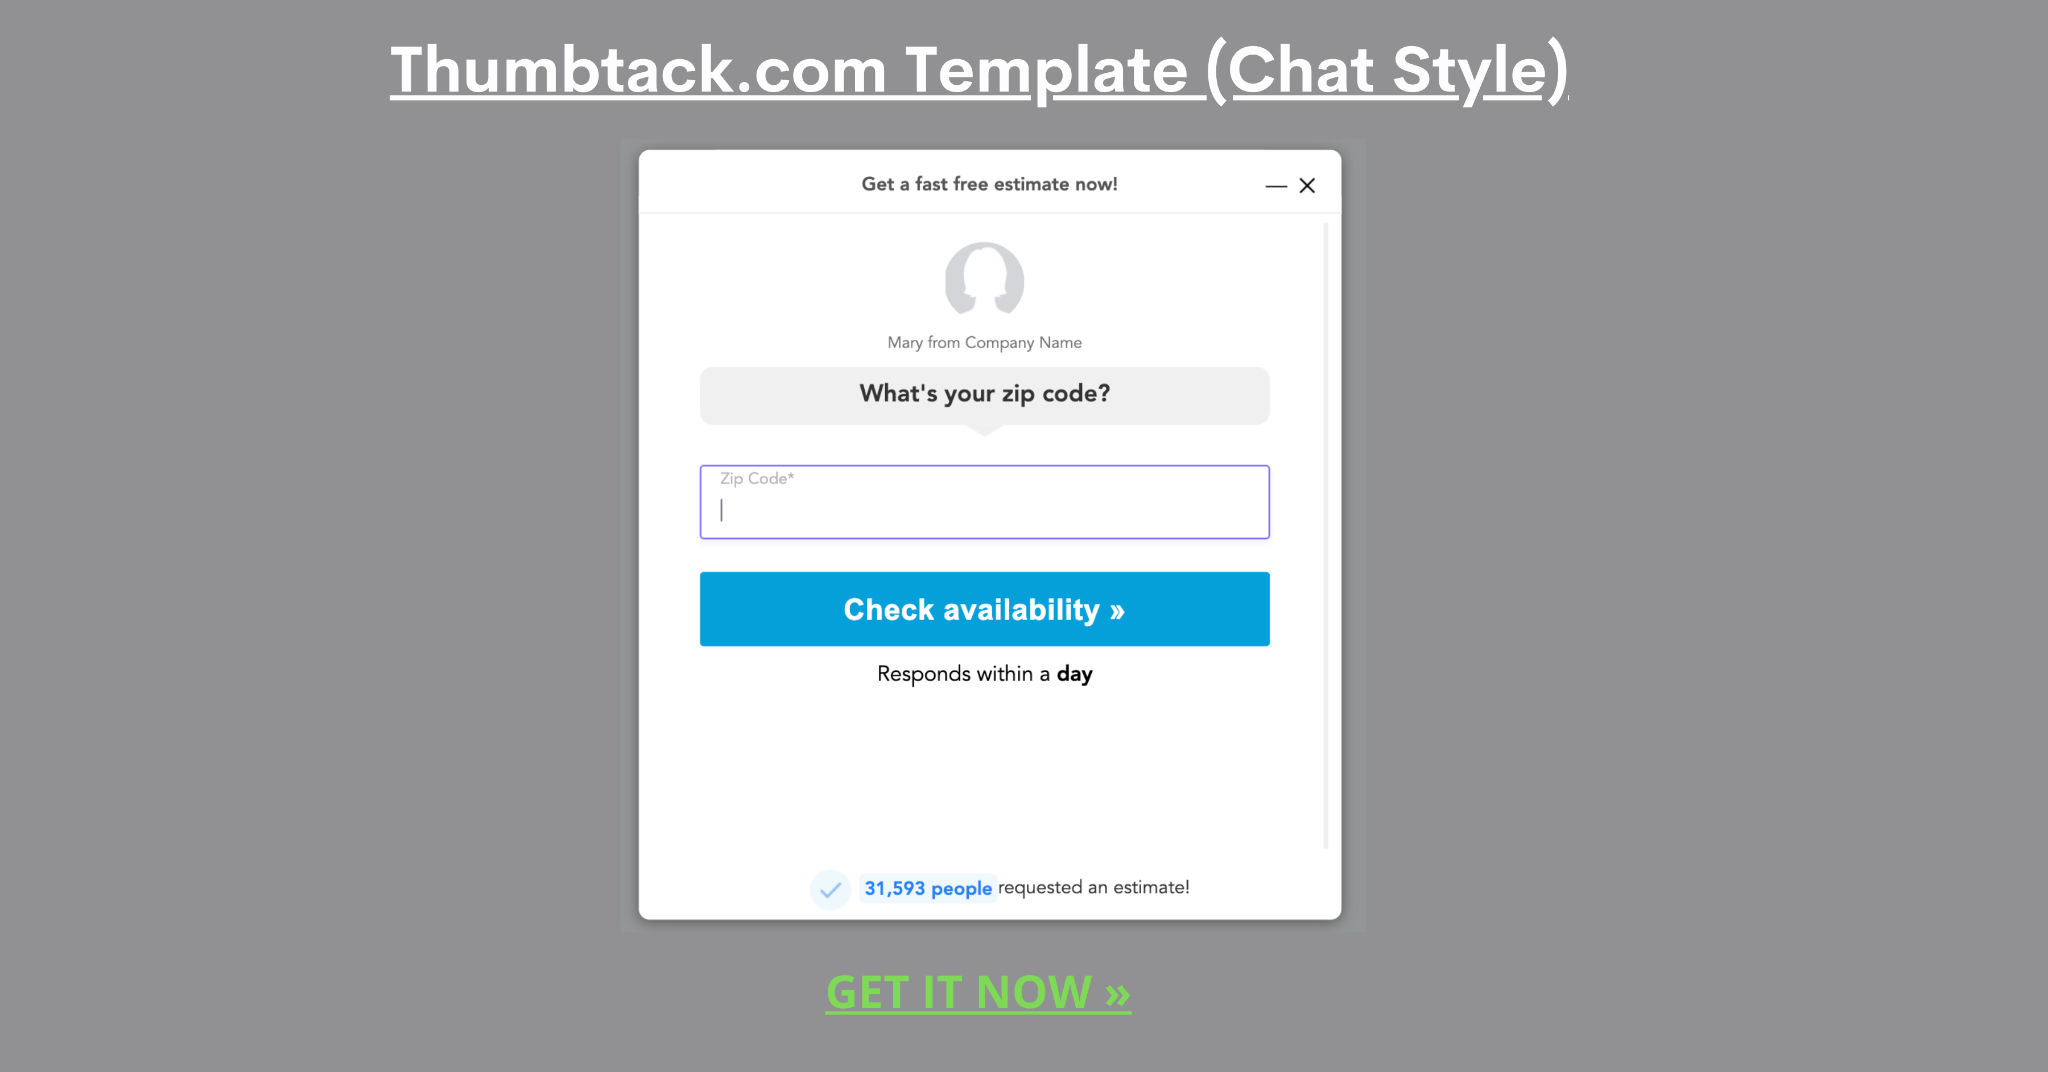 chat style thumbtack.com form template